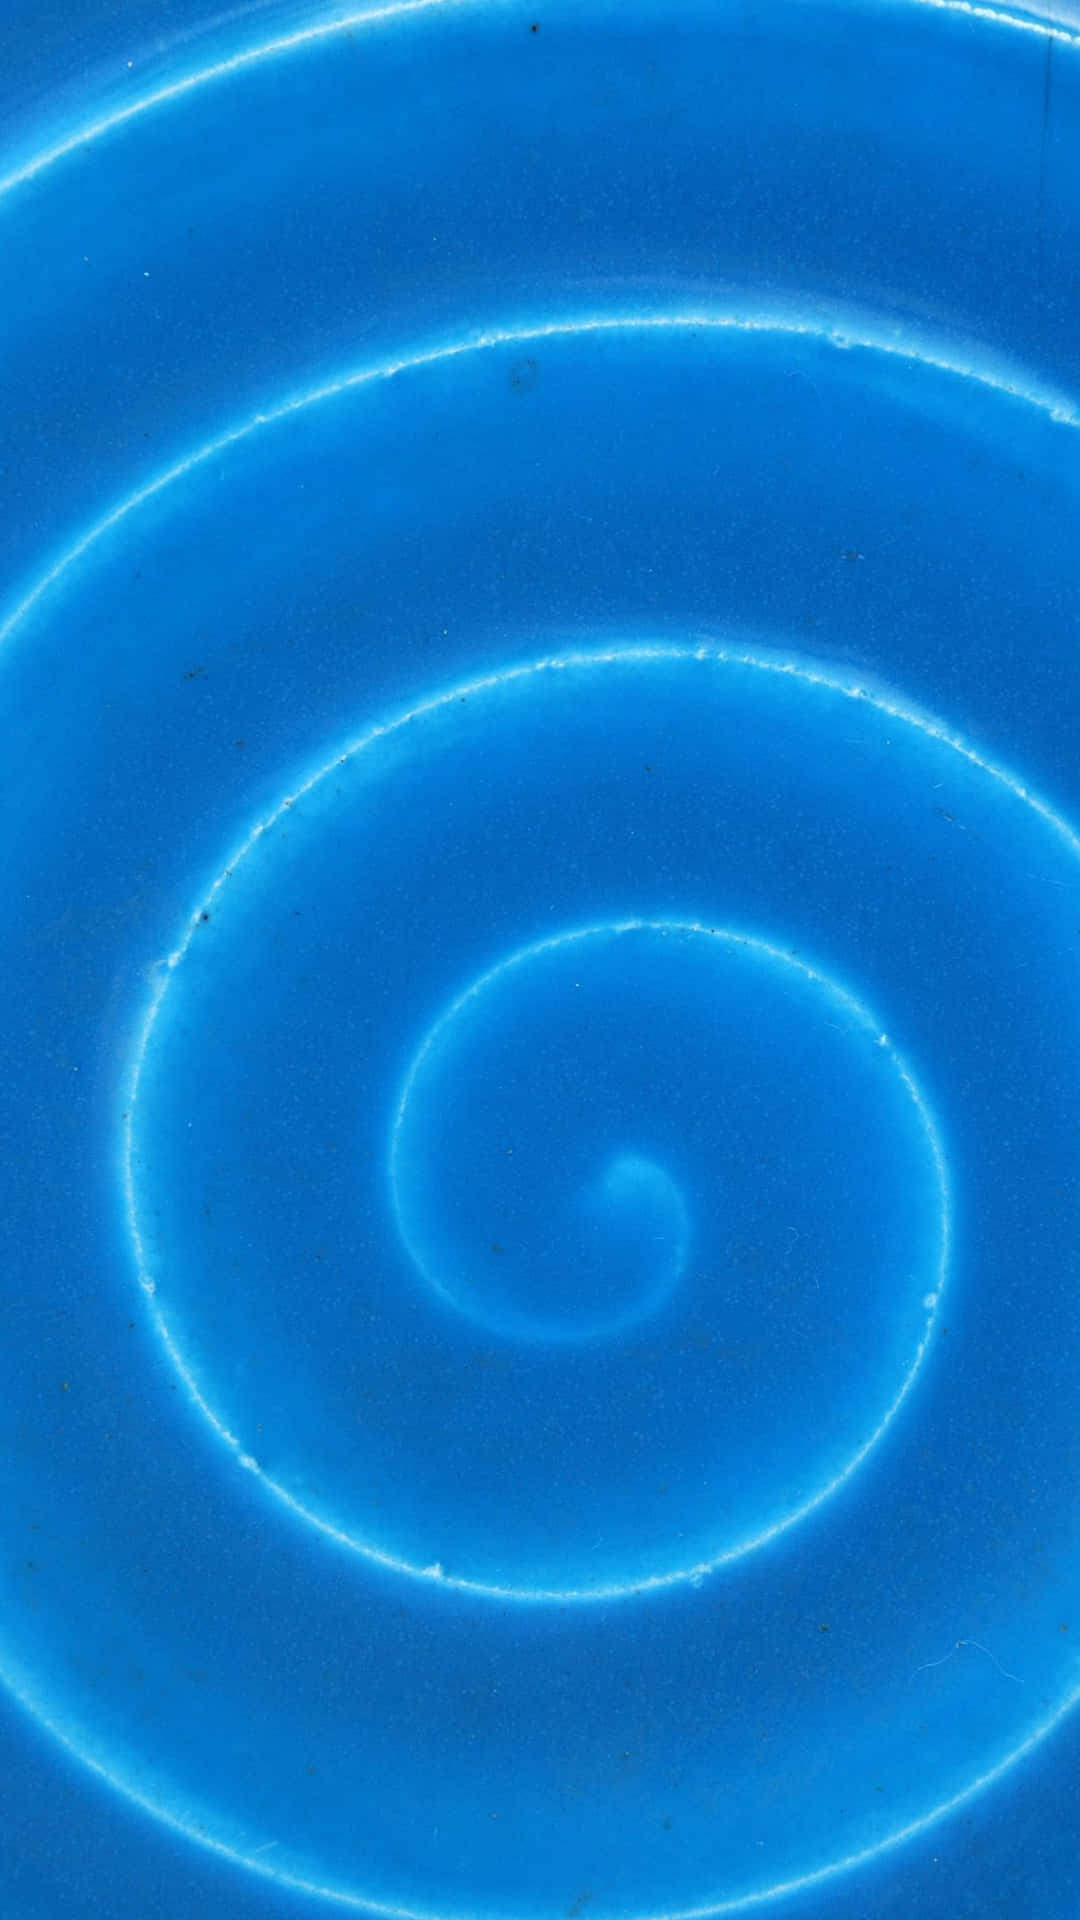 Make a statement with this bright Blue Swirl Background